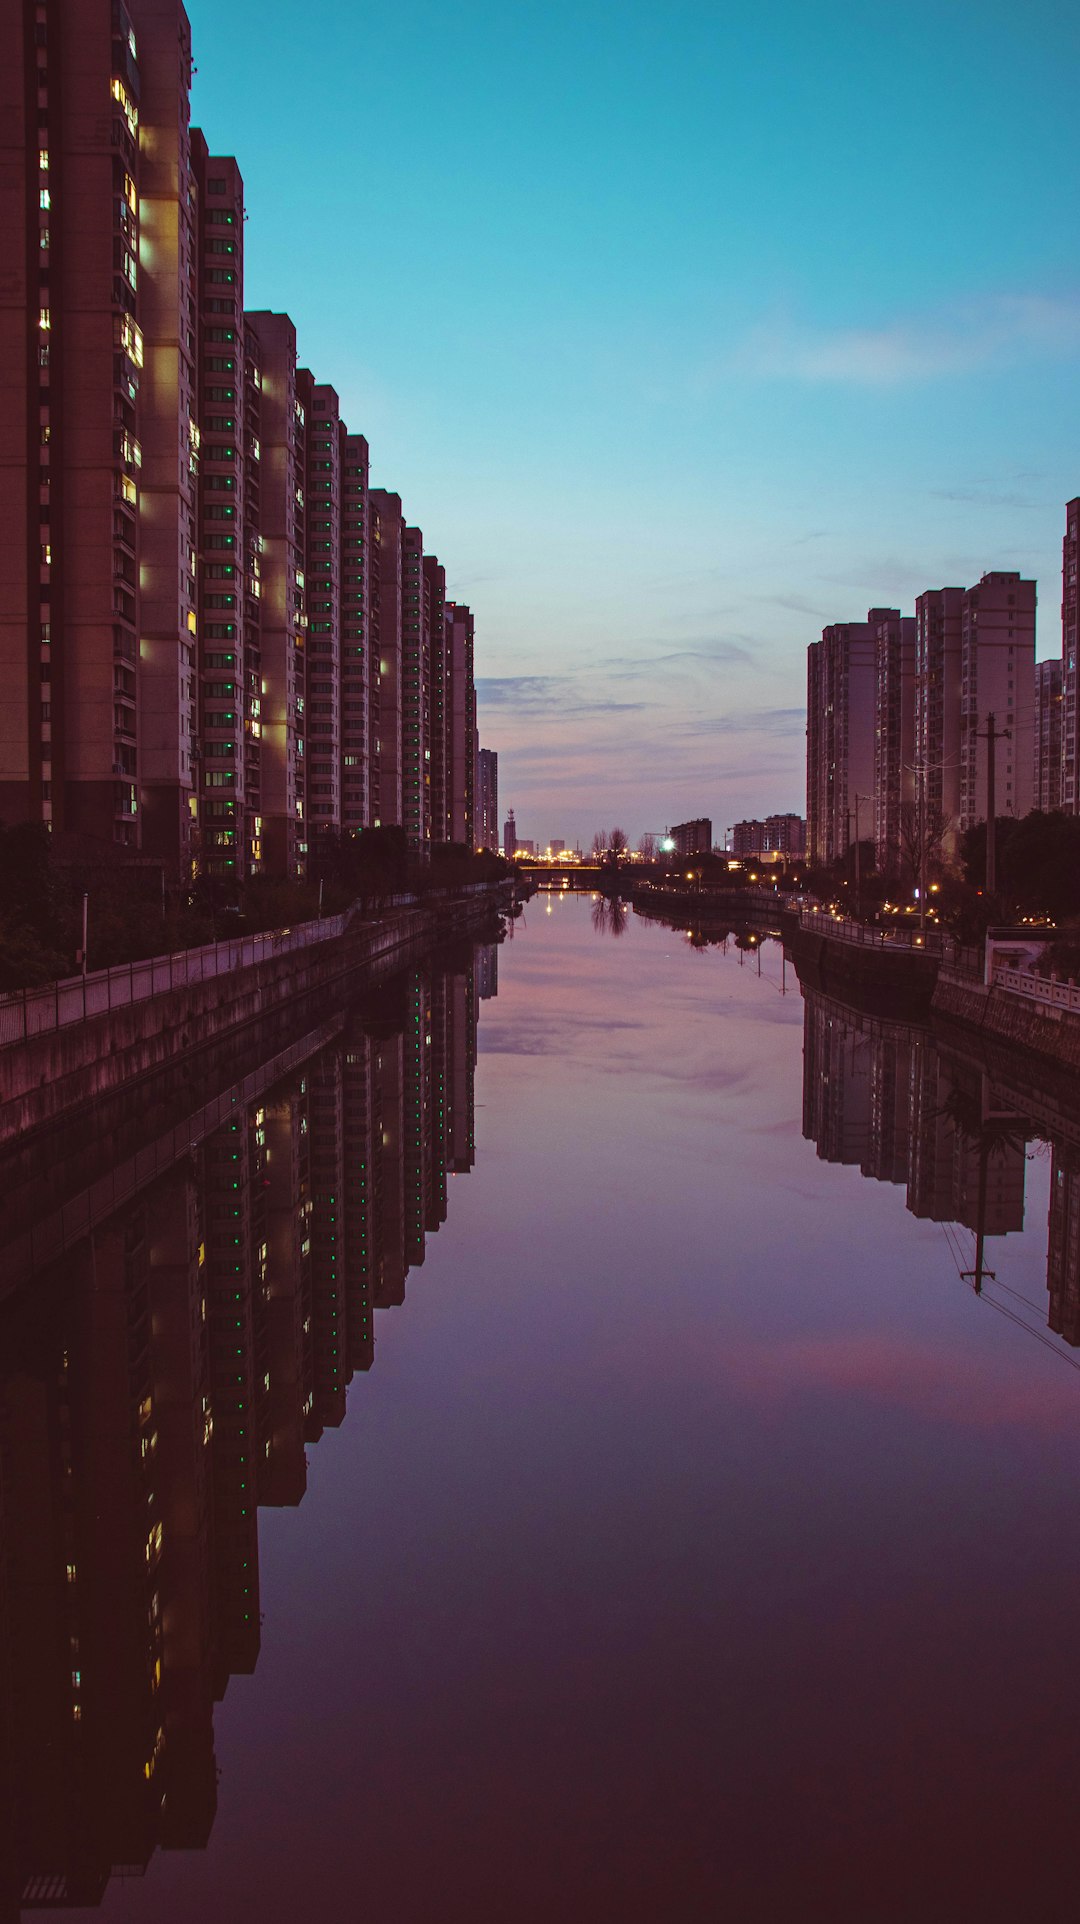 body of water between high rise buildings during daytime